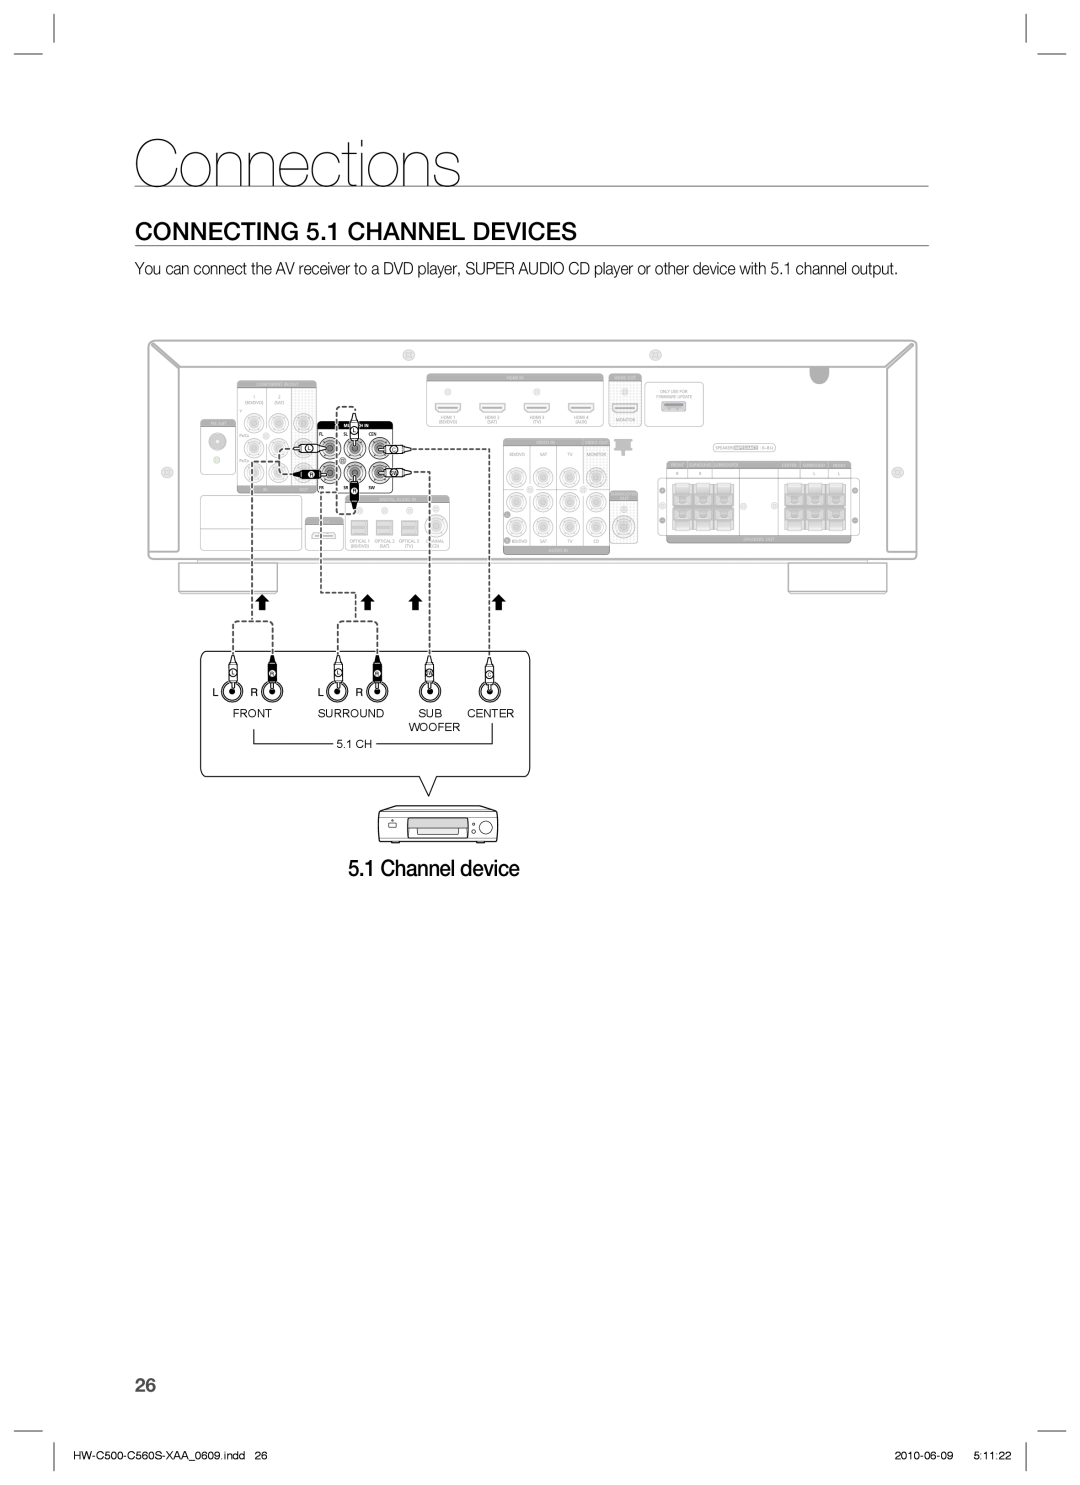 Samsung CONNECTING 5.1 CHANNEL DEVICES, 5.1Channel device, Connections, HW-C500-C560S-XAA 0609.indd26, 2010-06-09, C Sw 